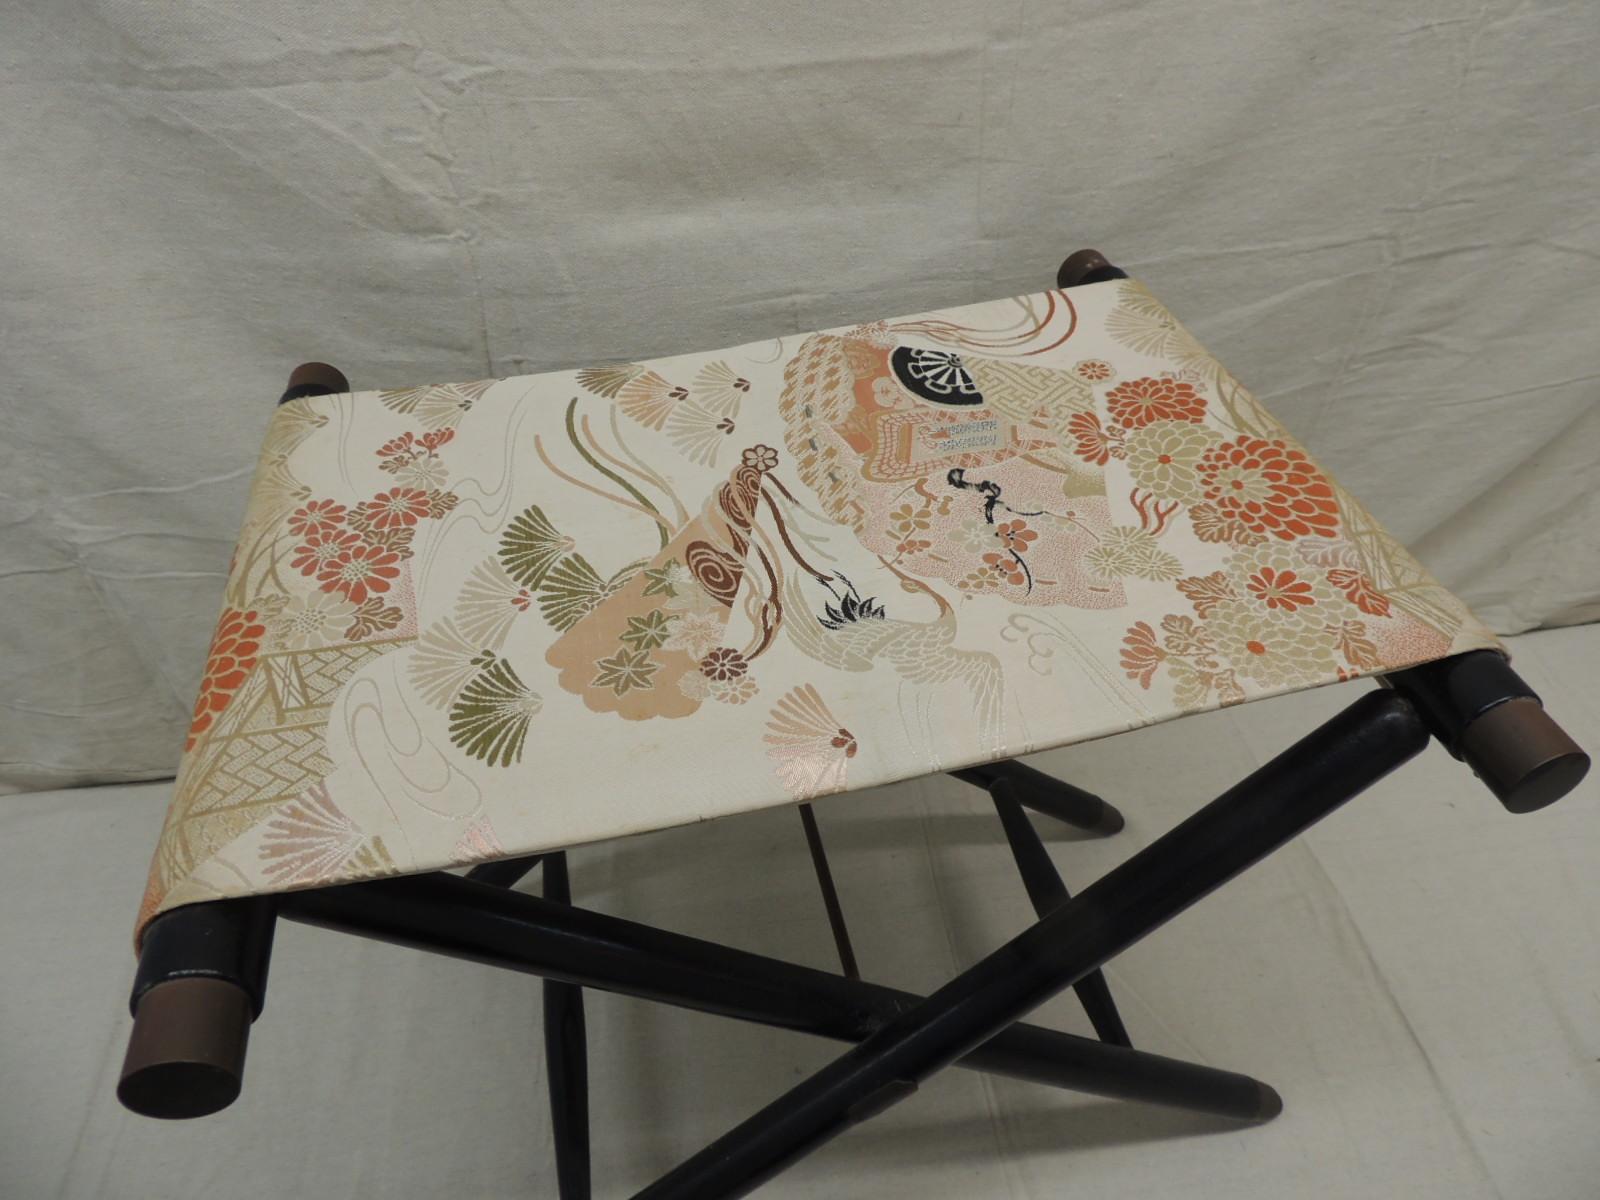 Asian Obi covered folding stool
Ebonized X base wood with bronze style hand covers and hardware.
Orange and pink floral silk Obi textile.
Could be use as a luggage rack too.
Size: 16 x 20 x 18.5 H.
  